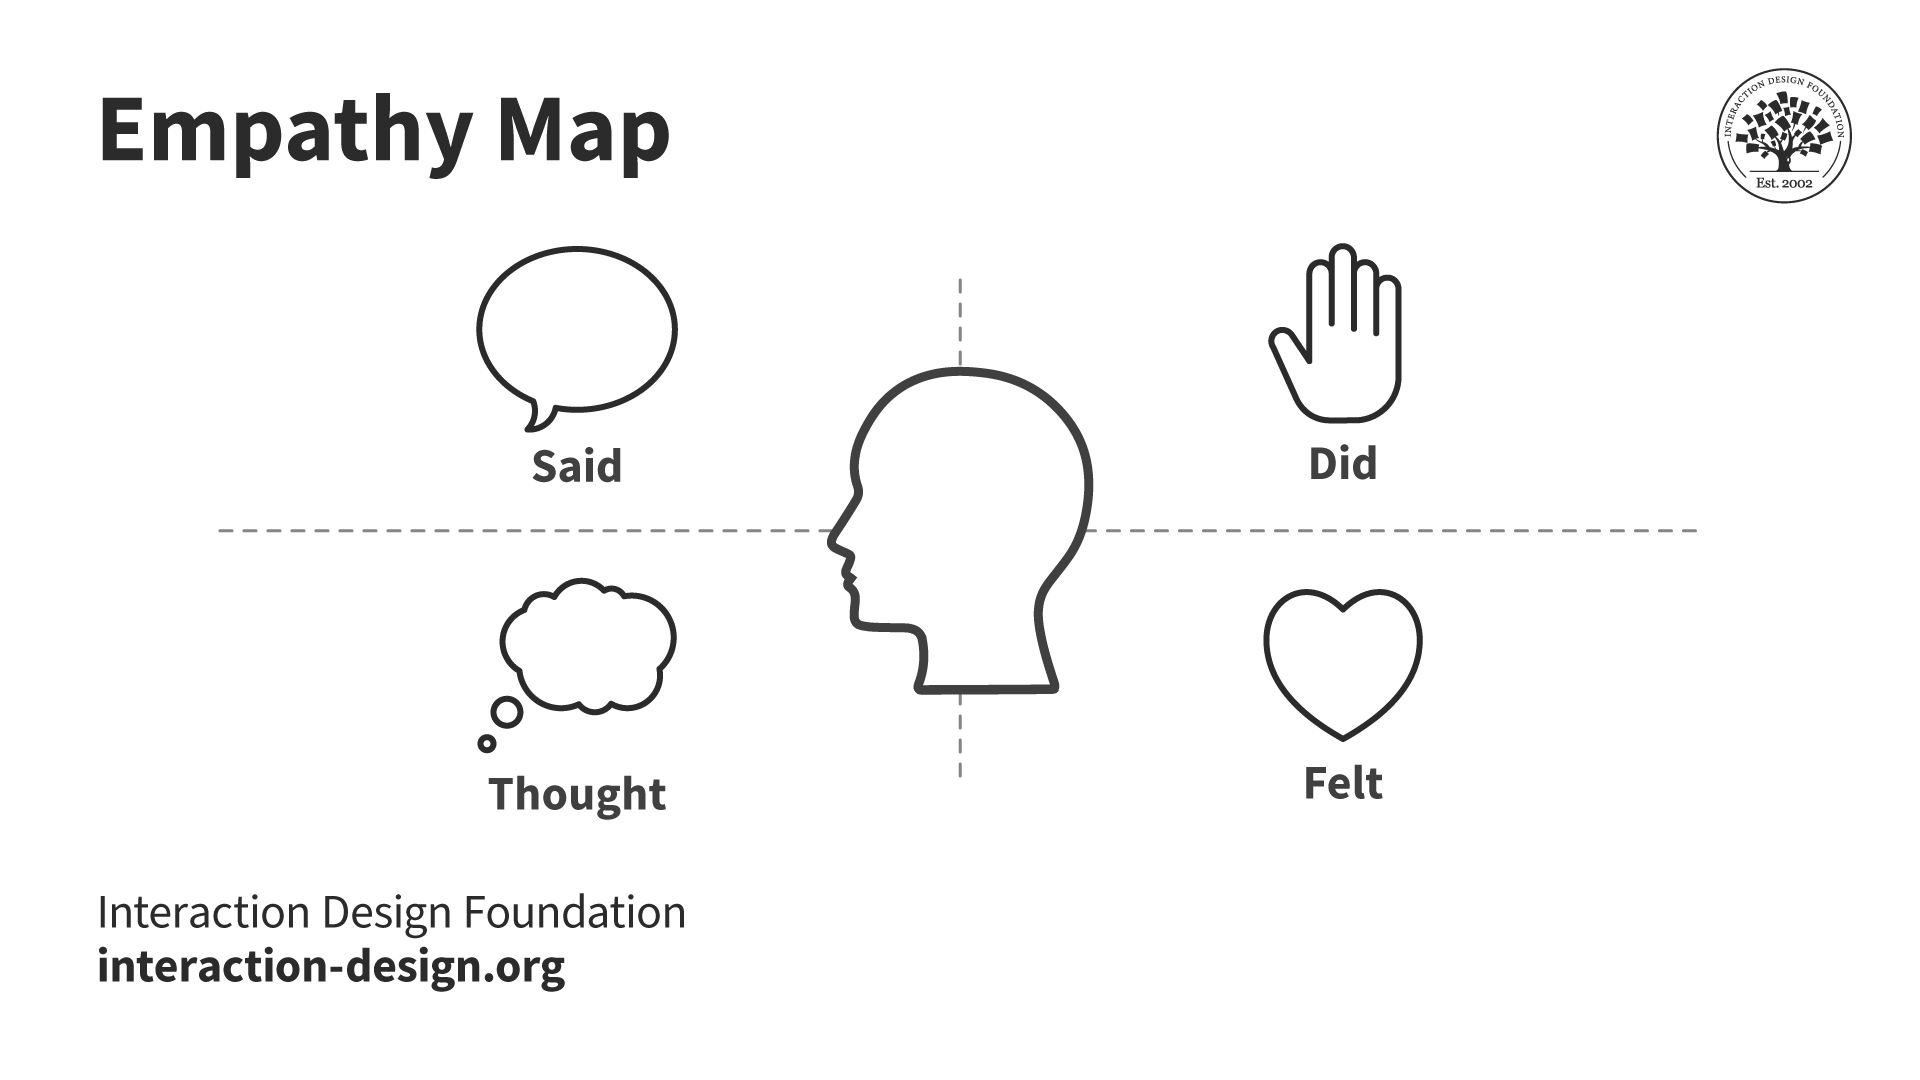 An empathy map template. It is a two by two grid with the user at the centre. Clockwise, the grid squares contain the words said, did, felt and thought.